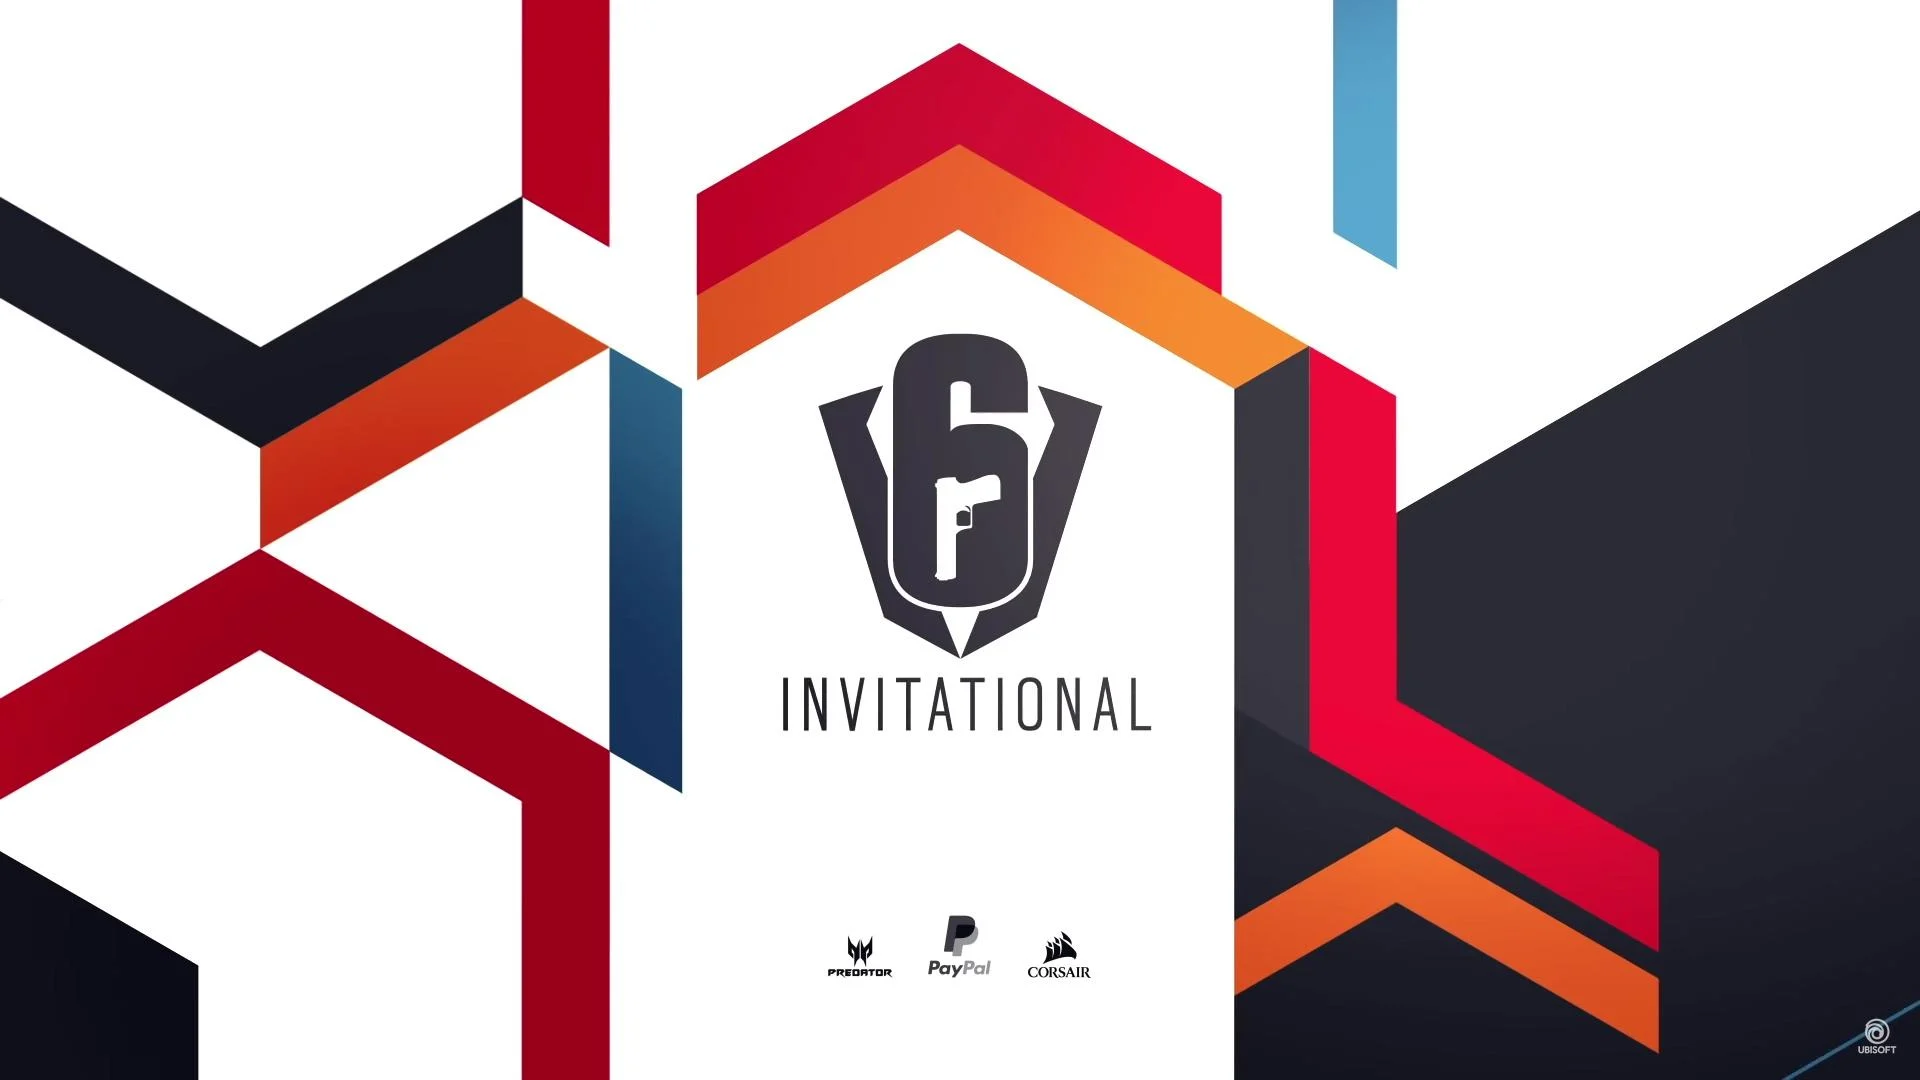 Rainbow 6 Siege – The Six Invitational 2023 Comes Back To Canada, as Team BDS Earns Their Spot in the Tournament